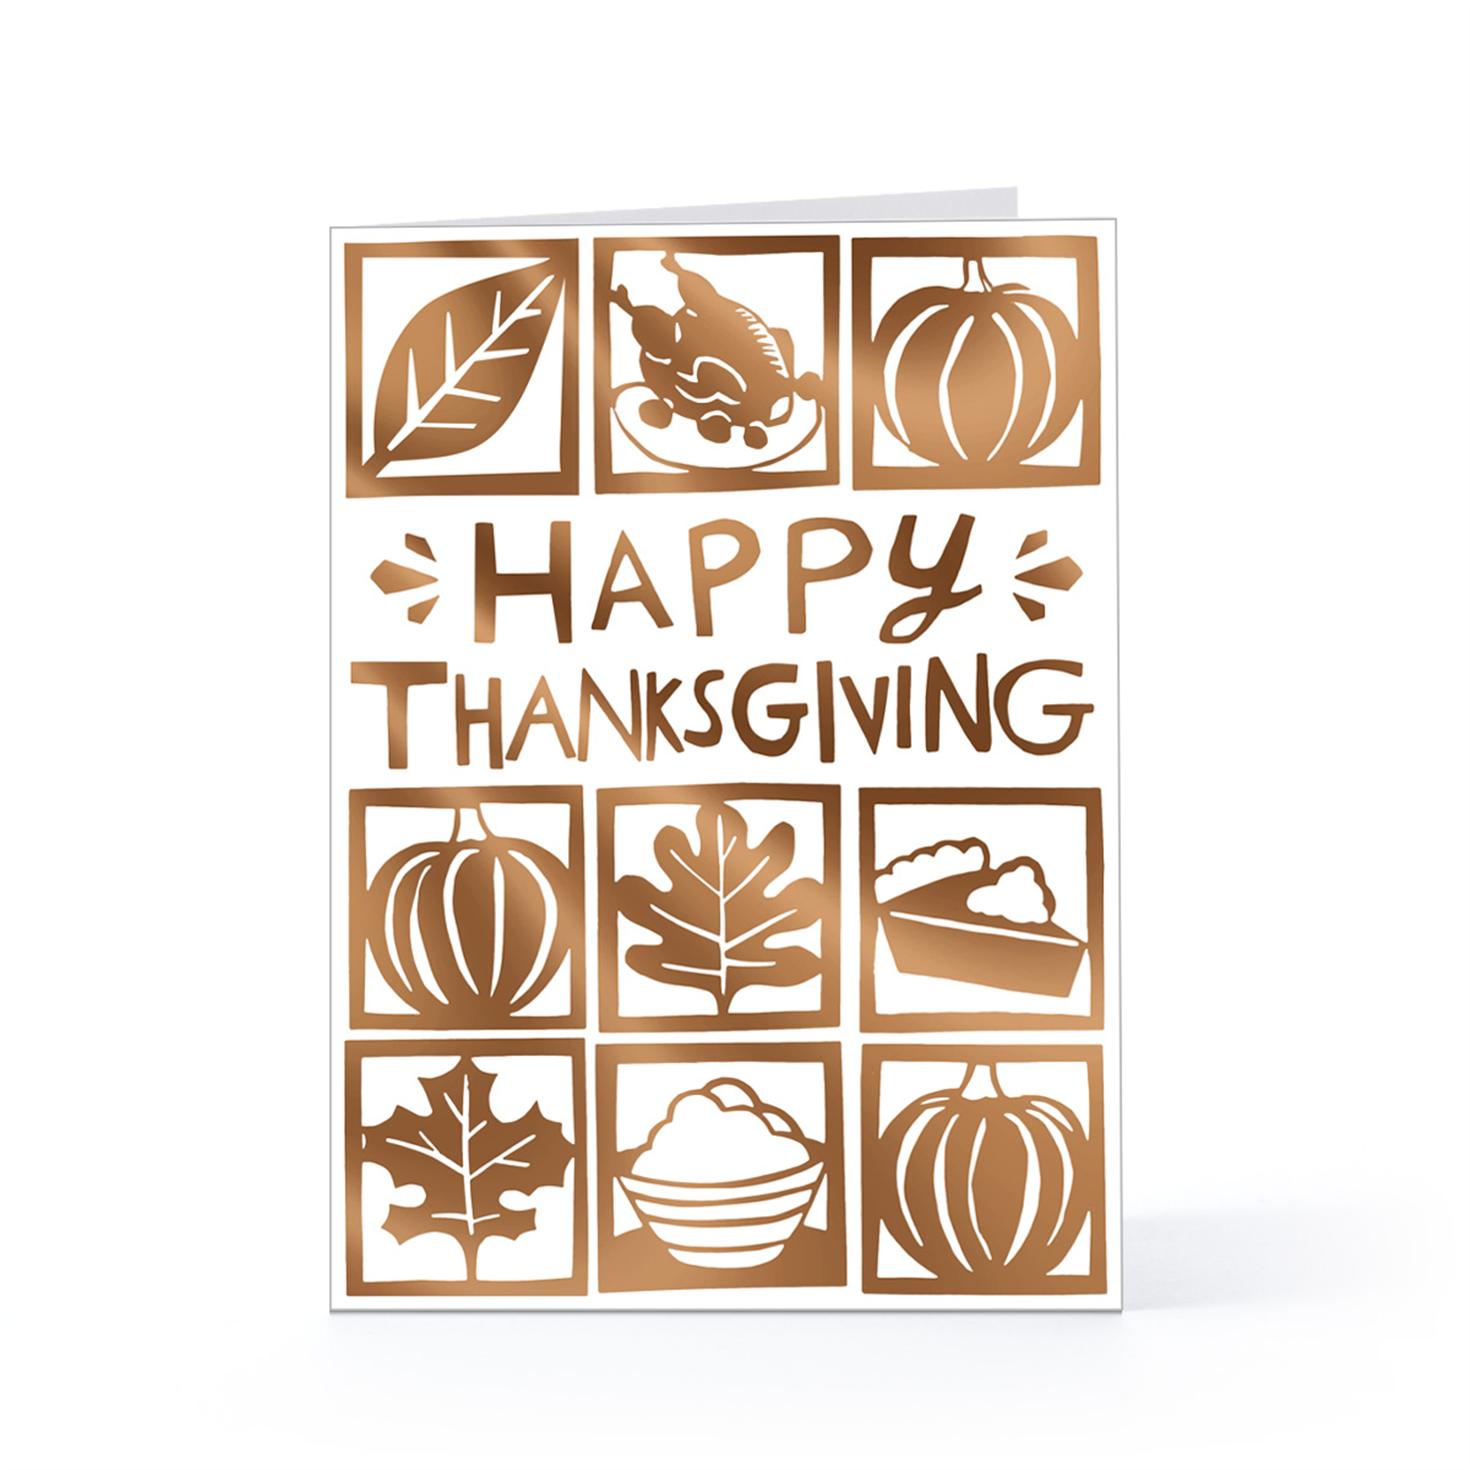 Sample Thanksgiving Messages